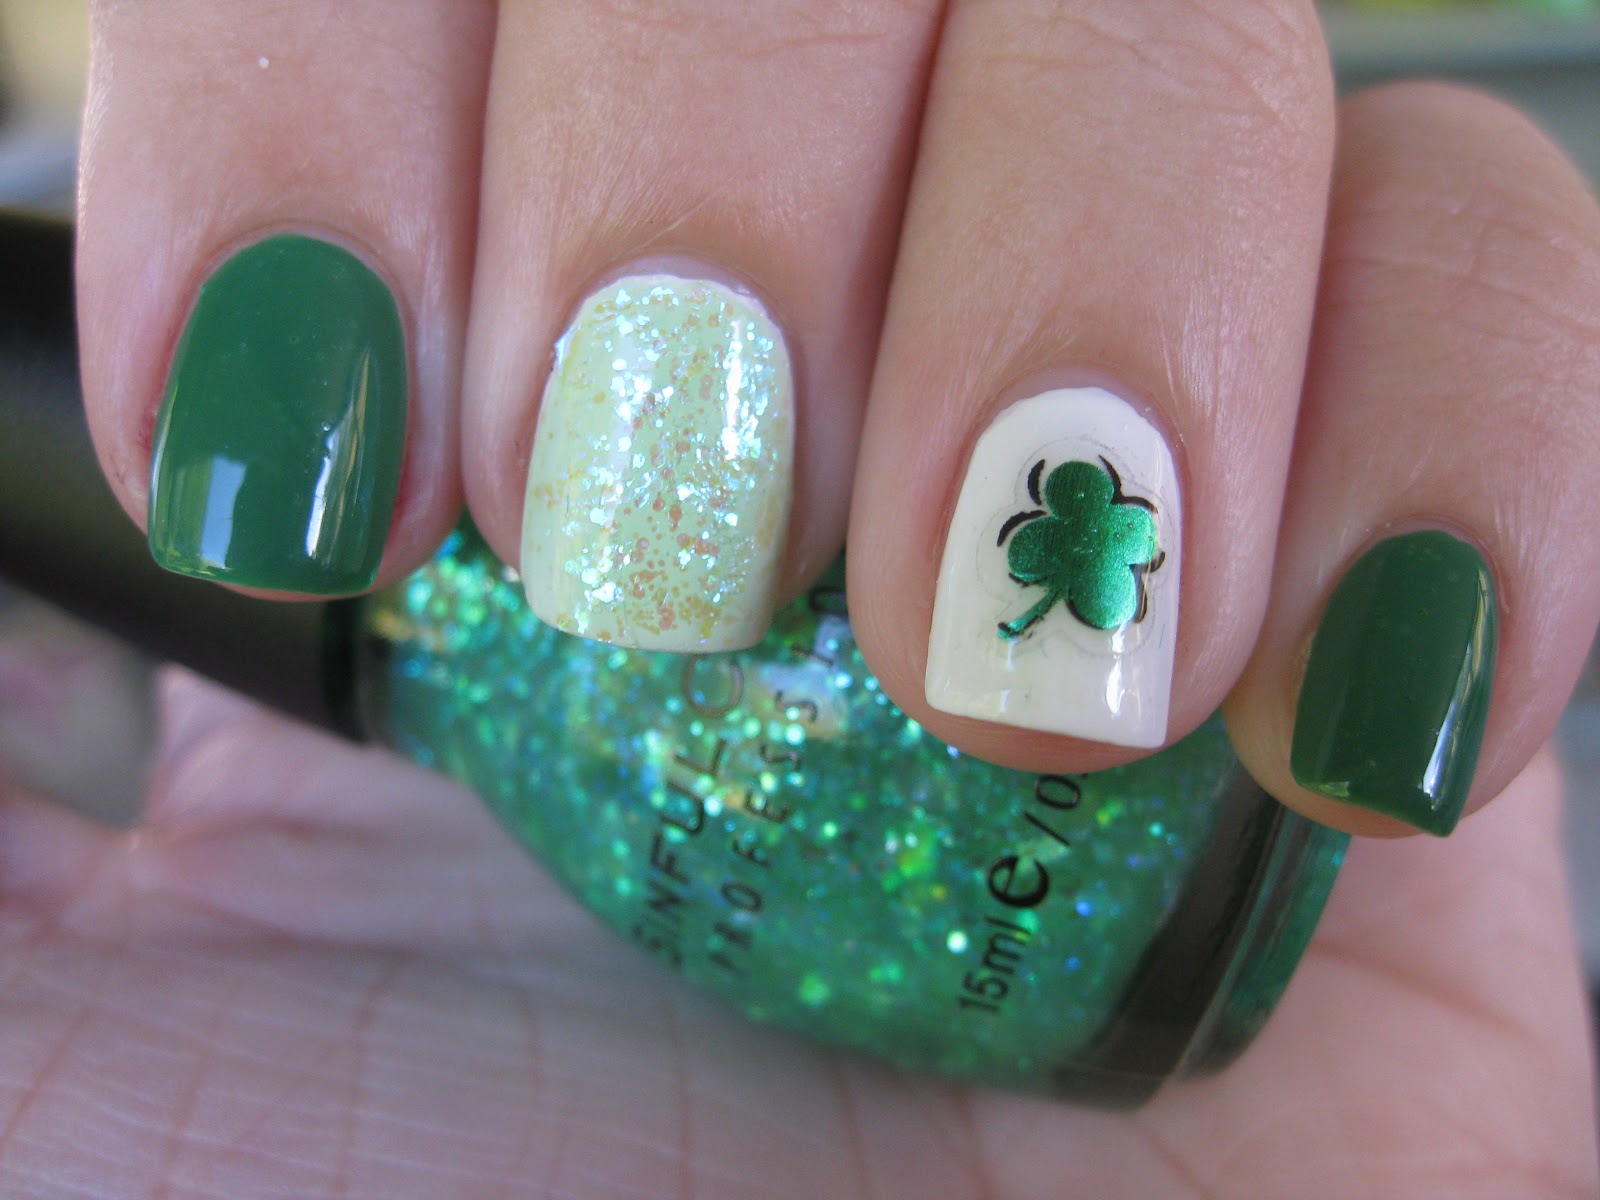 Clover Nail Designs for St. Patrick's Day - wide 2